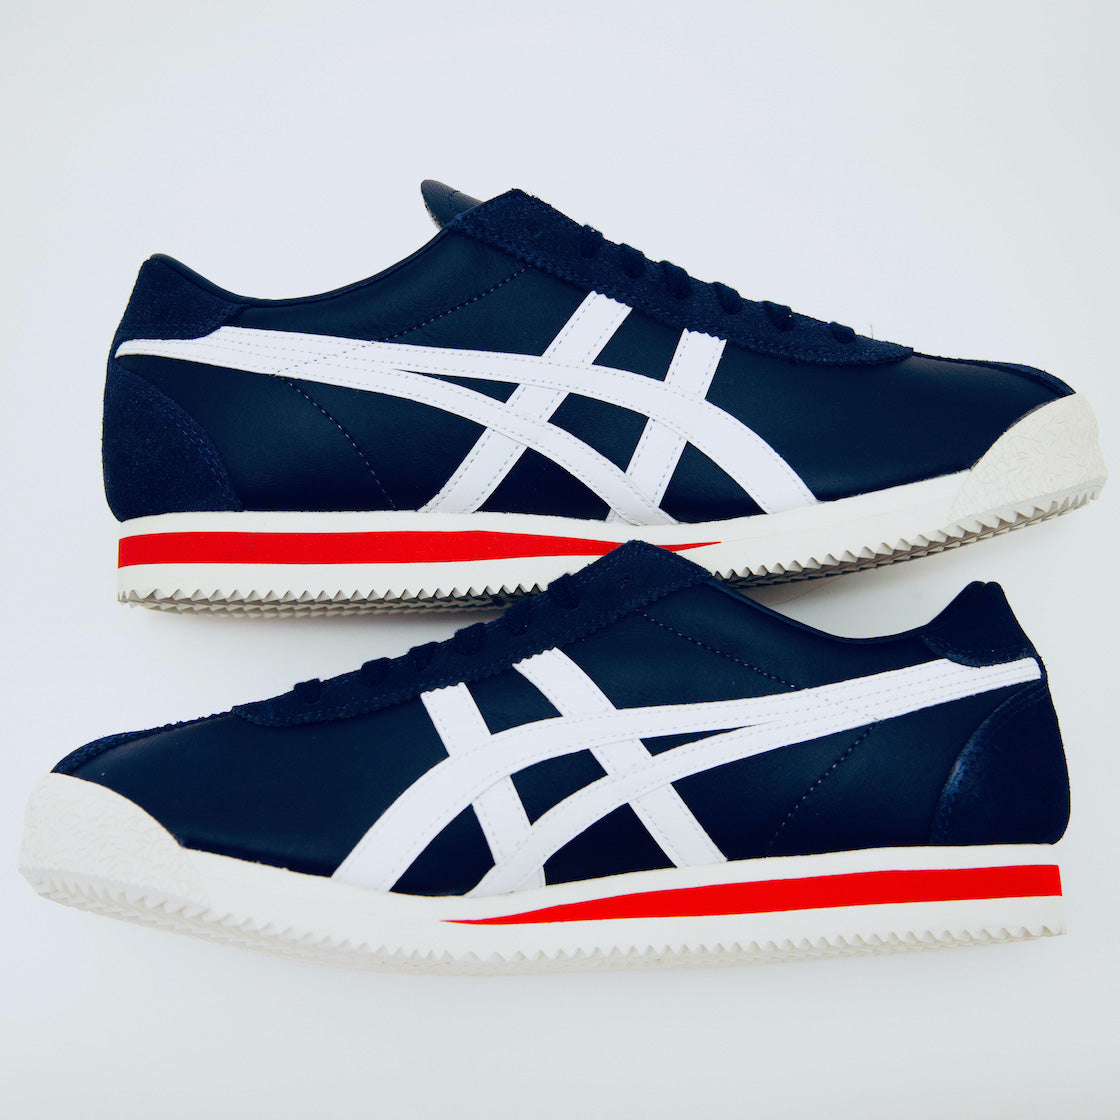 Asics Gel Running Shoes Woman Luxury Brand Trainers Asic Onitsukas